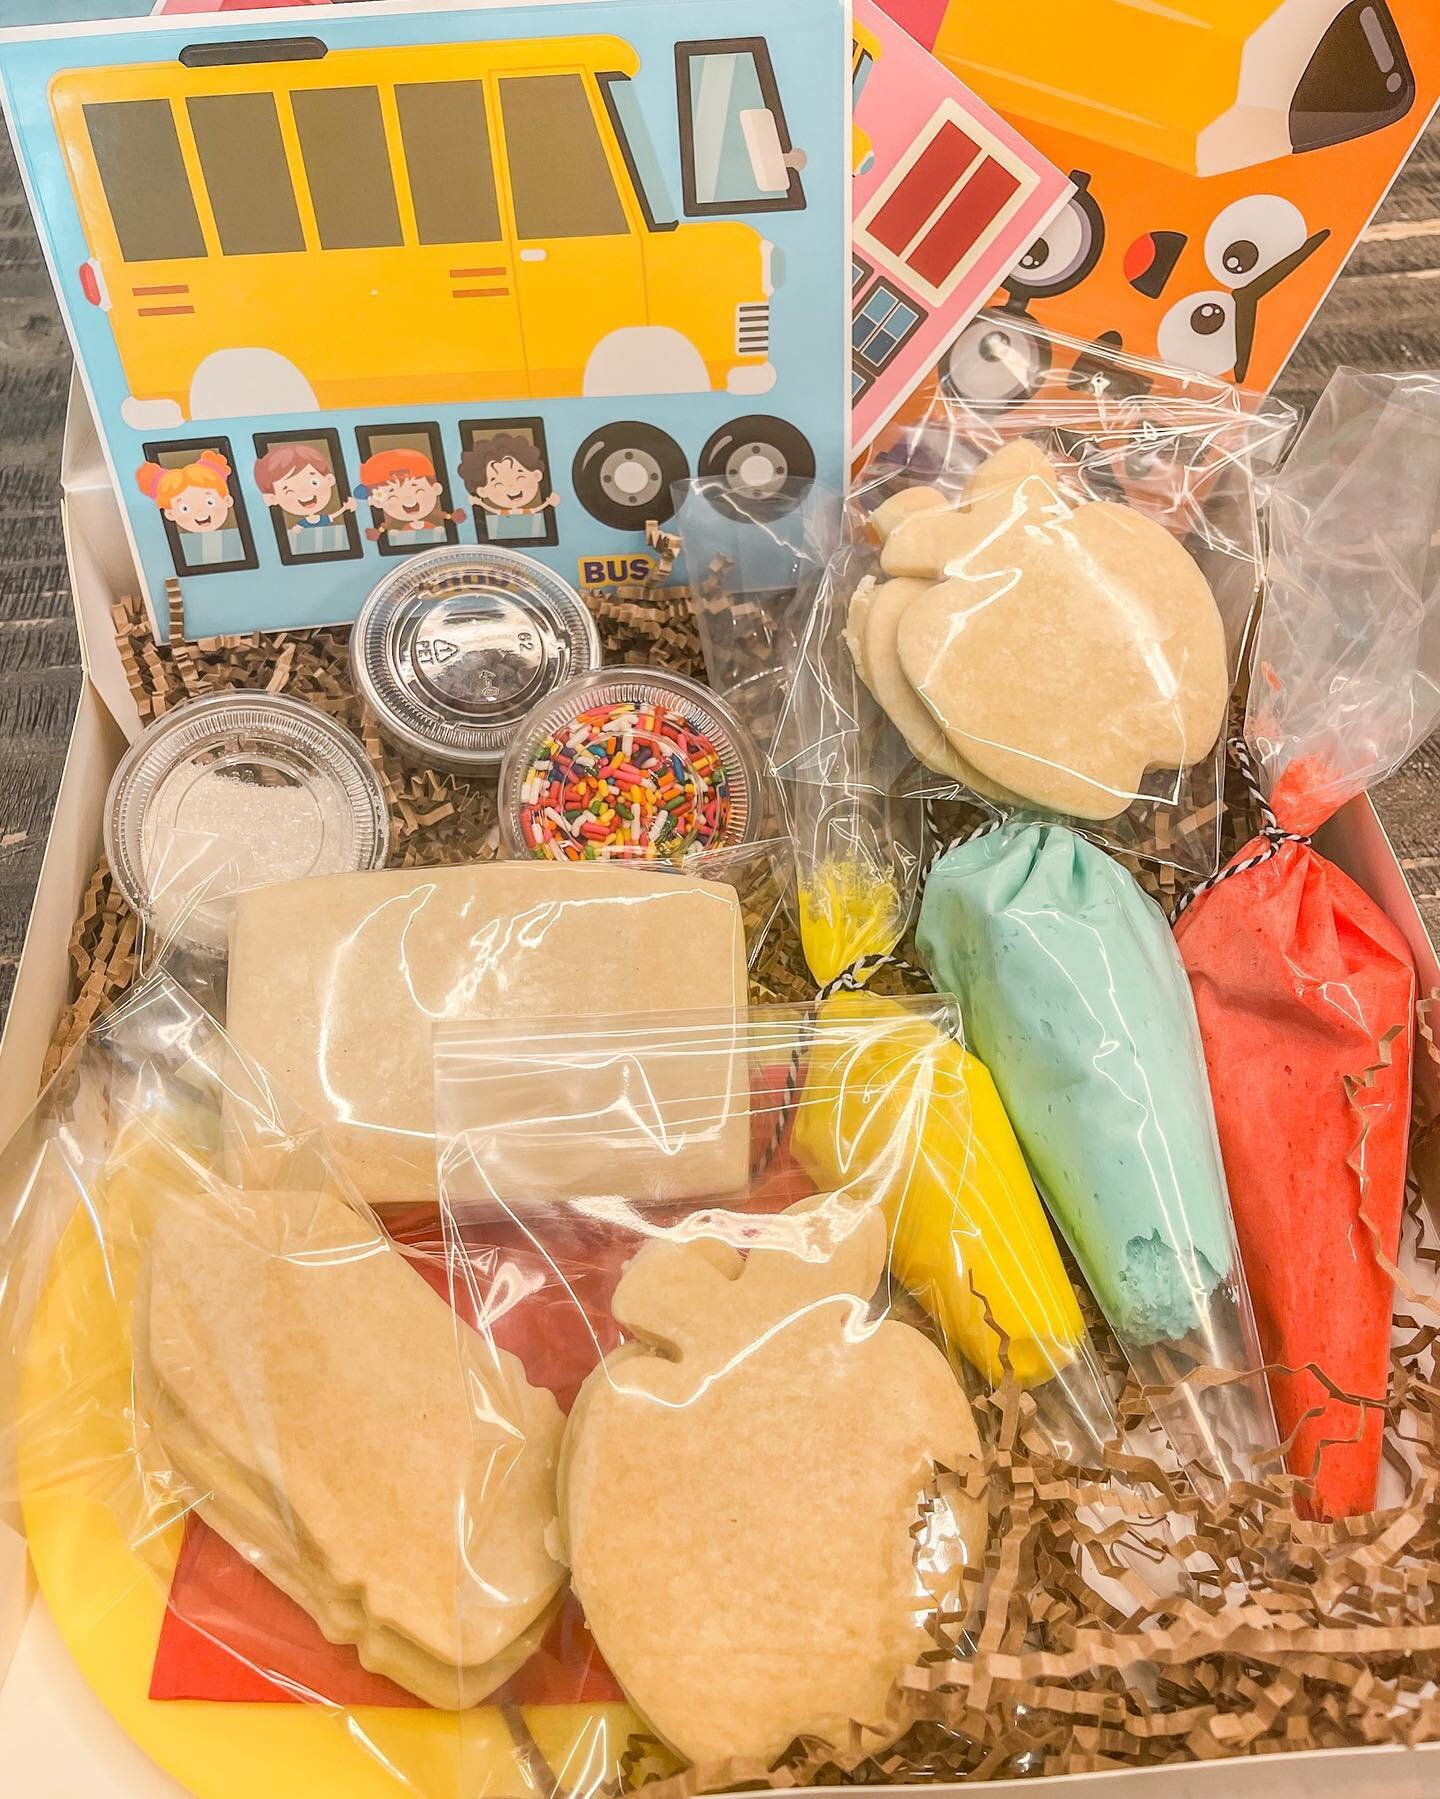 I&rsquo;m so excited to share the final look to Little Whipper Bakery&rsquo;s Back to School DIY Cookie Kit!

📓✏️📚🖍✂️🚌

I pray a blessing over each and every child as they enter into this new school year. May you spread kindness, love and grace. 